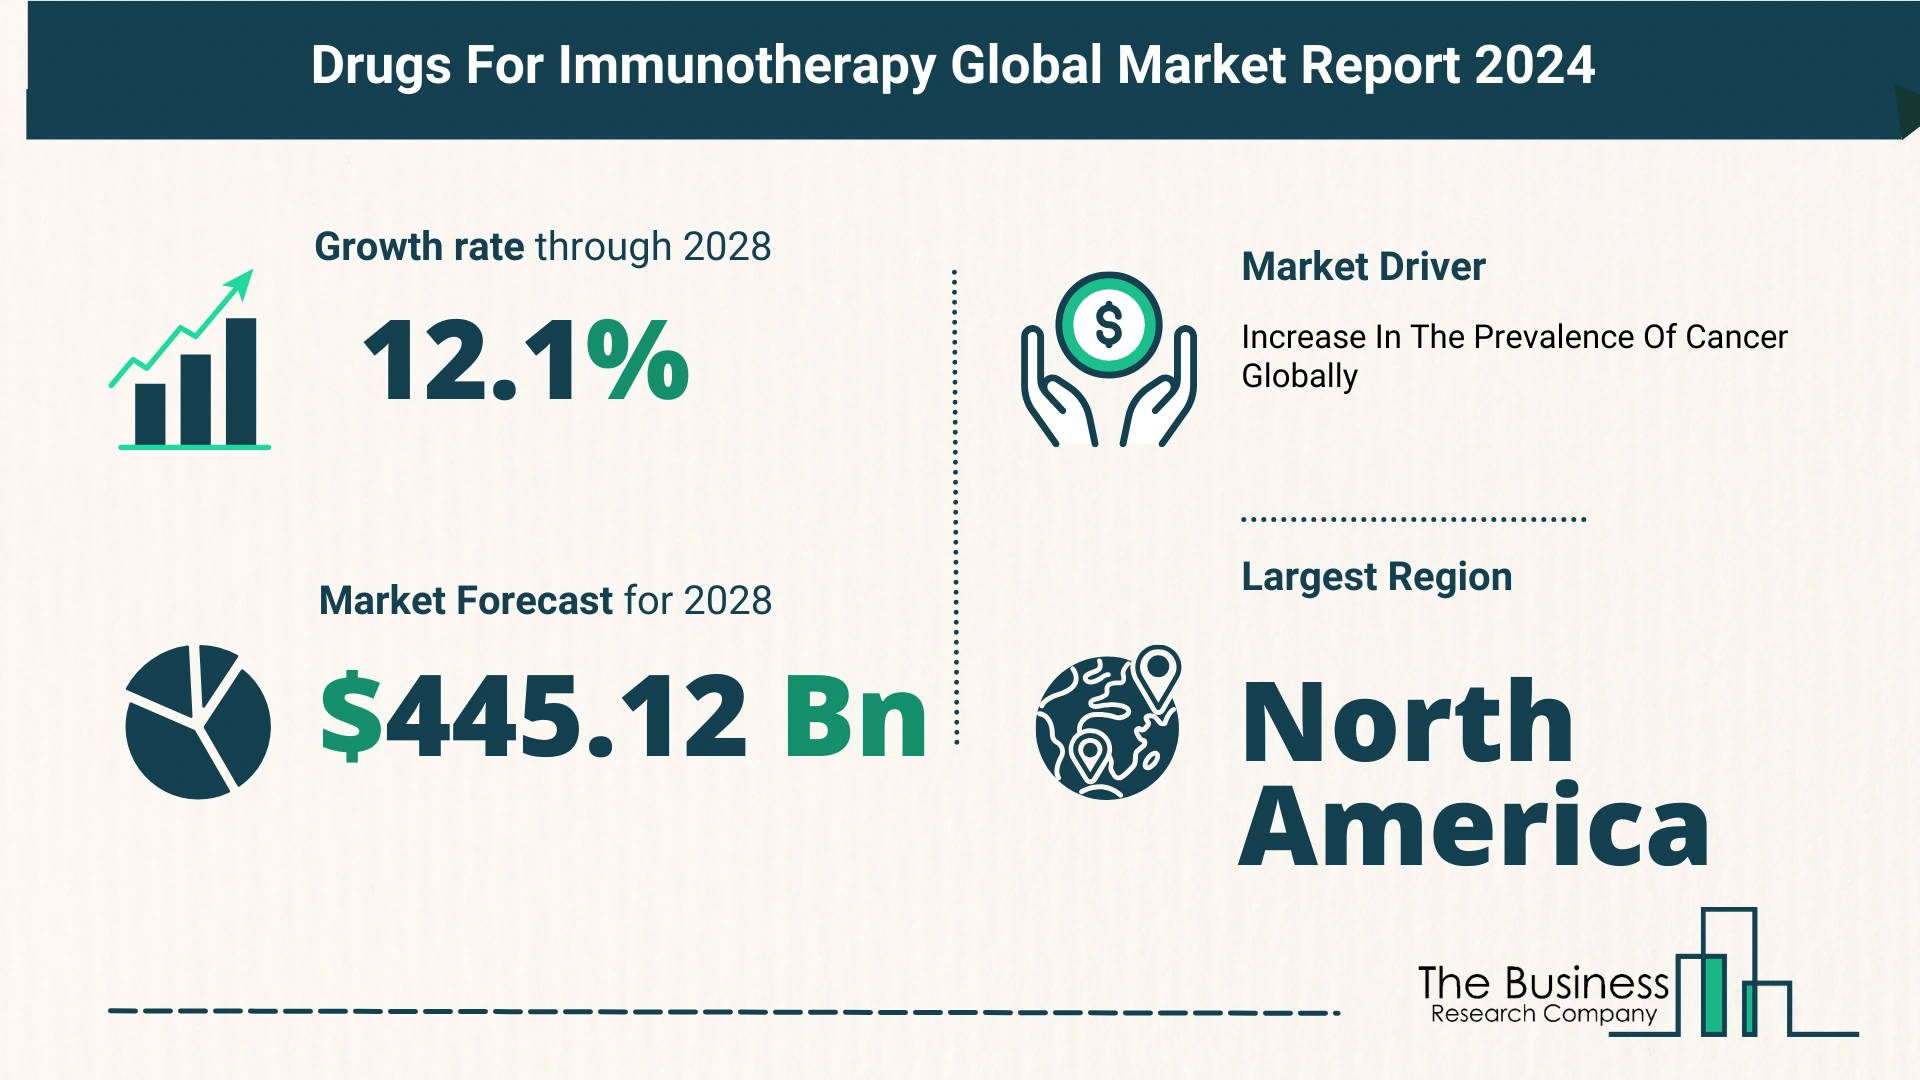 Key Trends And Drivers In The Drugs for Immunotherapy Market 2024